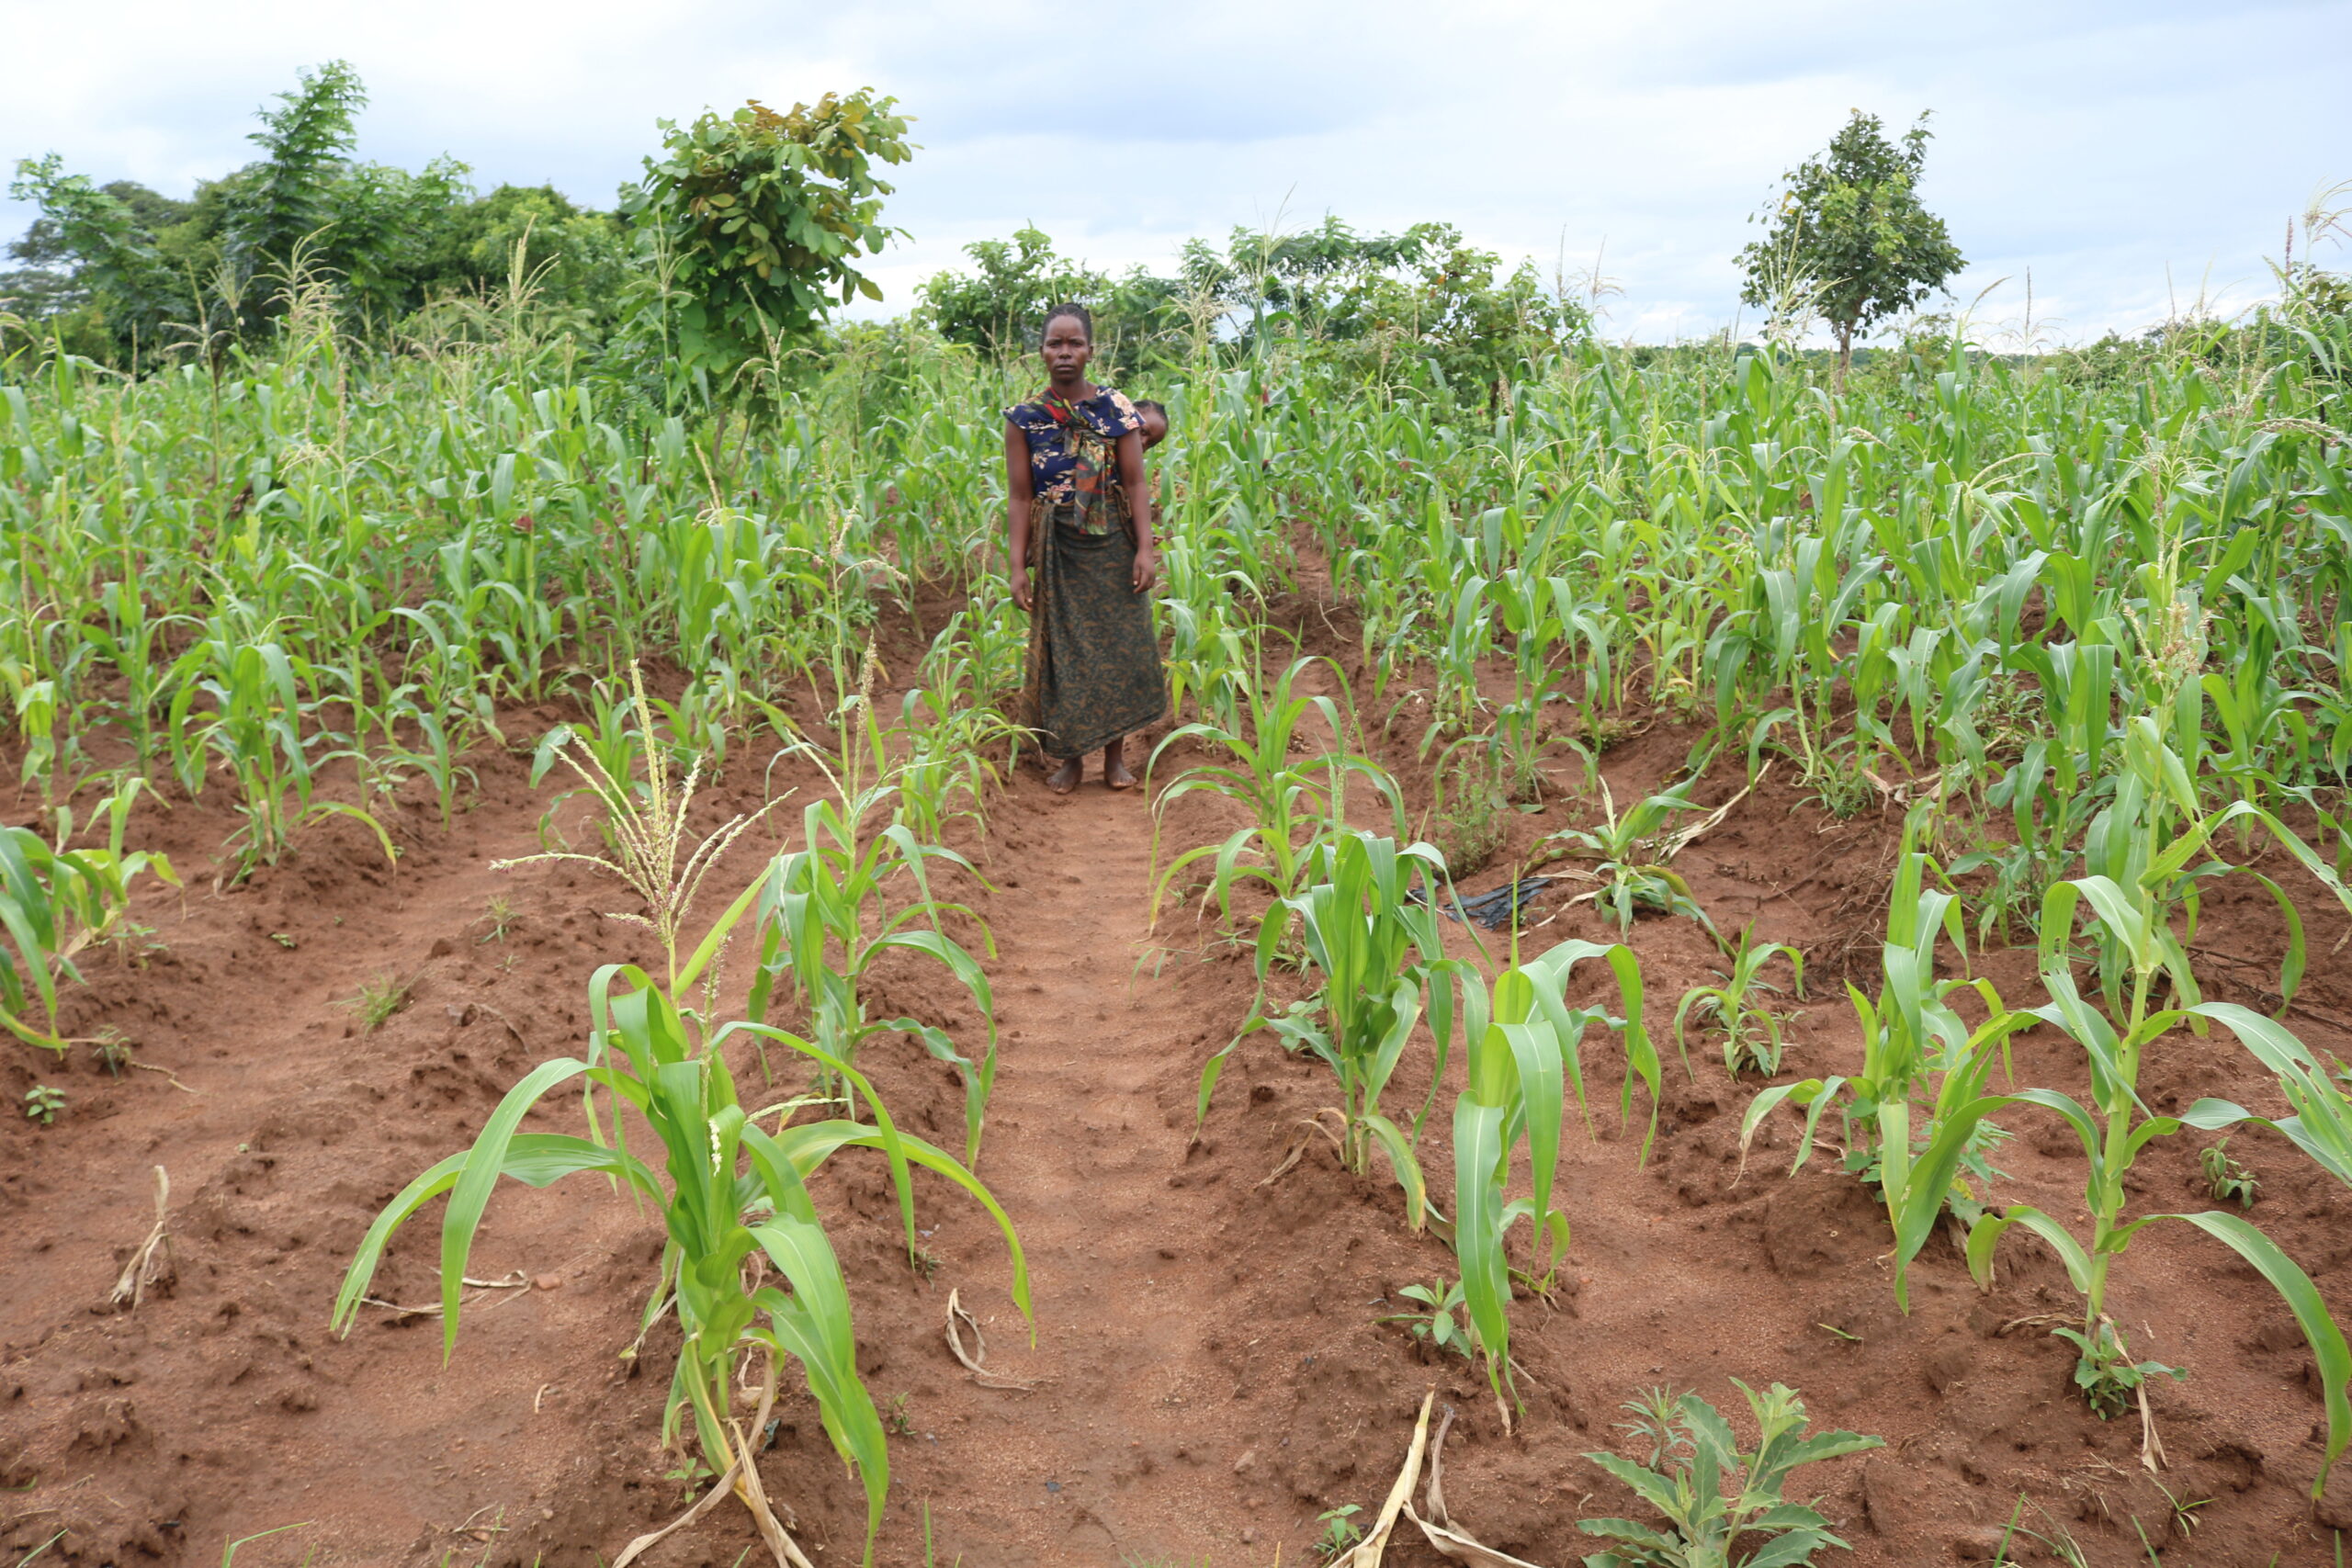 Read more about the article The Life of a Subsistence Farmer in Rural Malawi